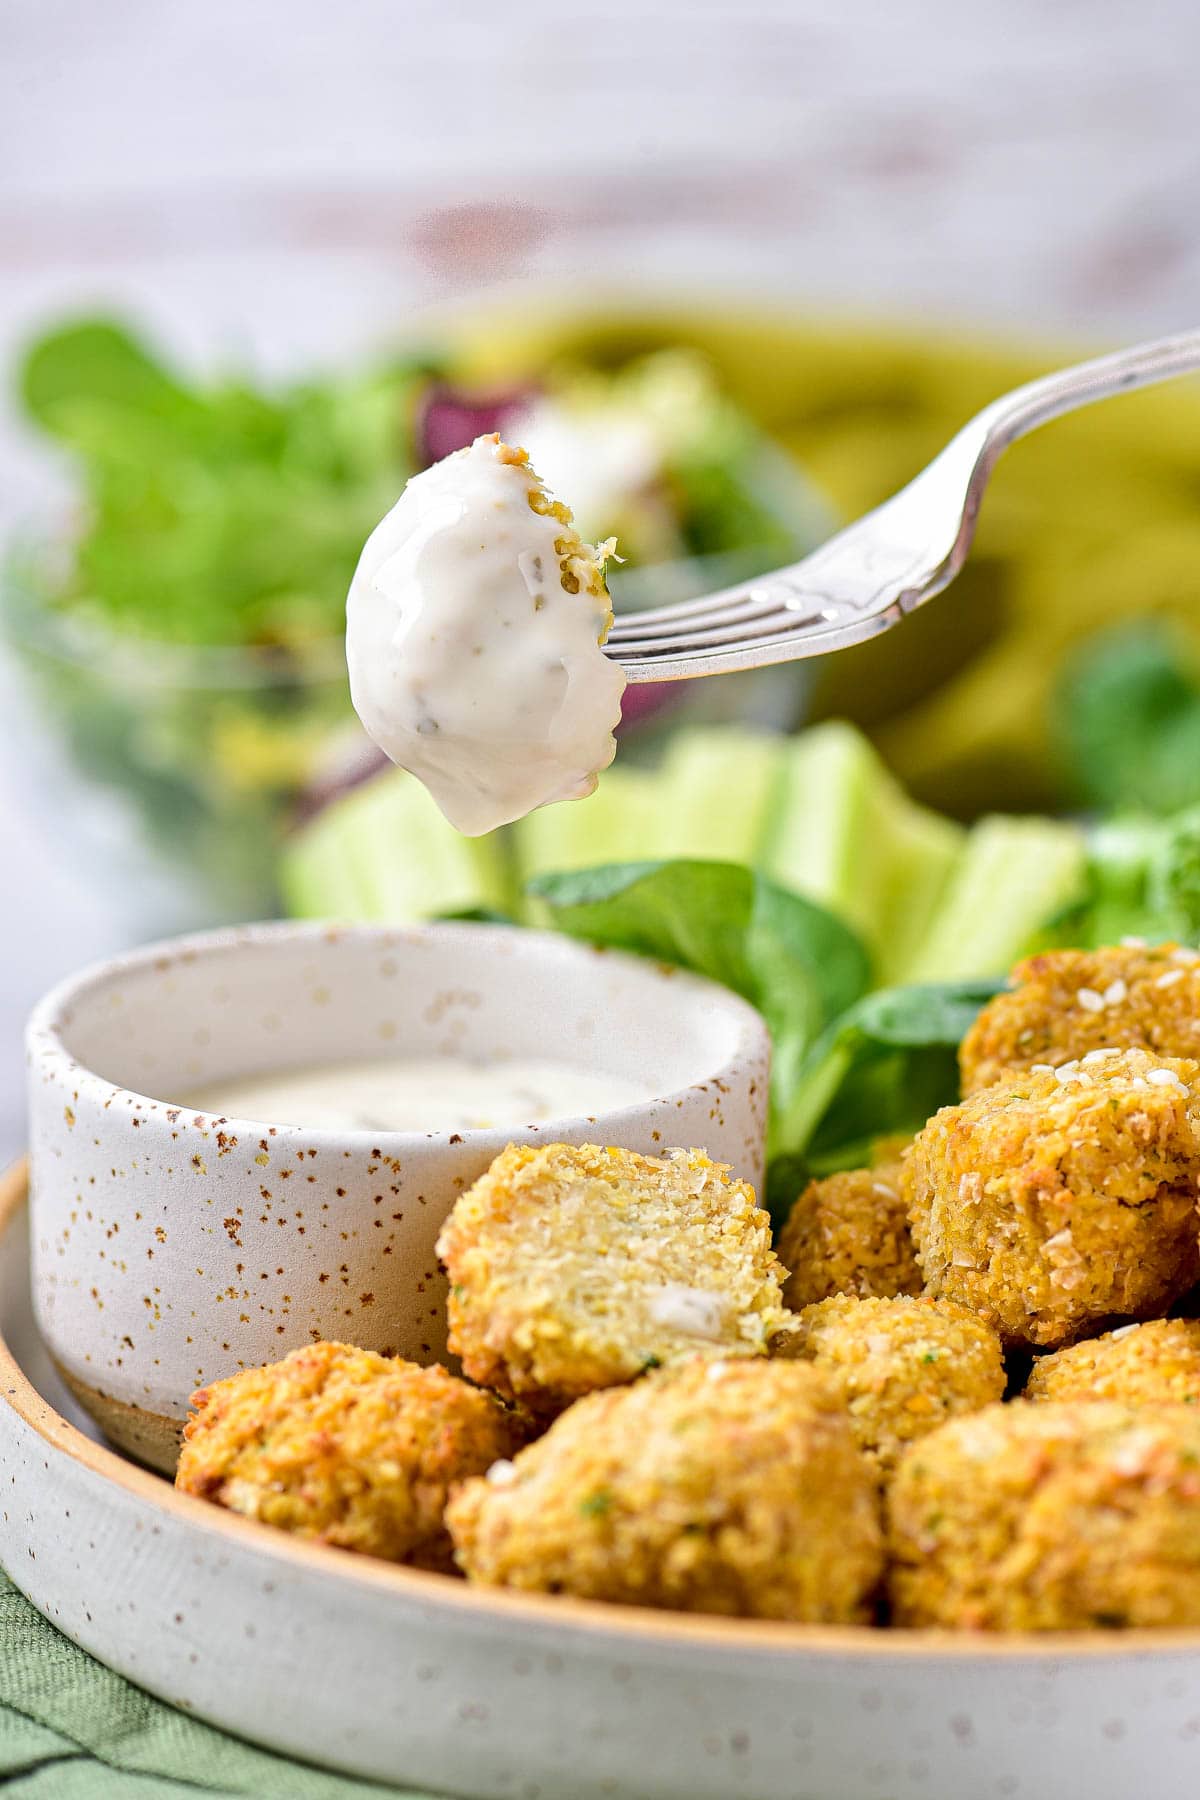 silver fork dipping half a falafel ball in white creamy dip with plate below.